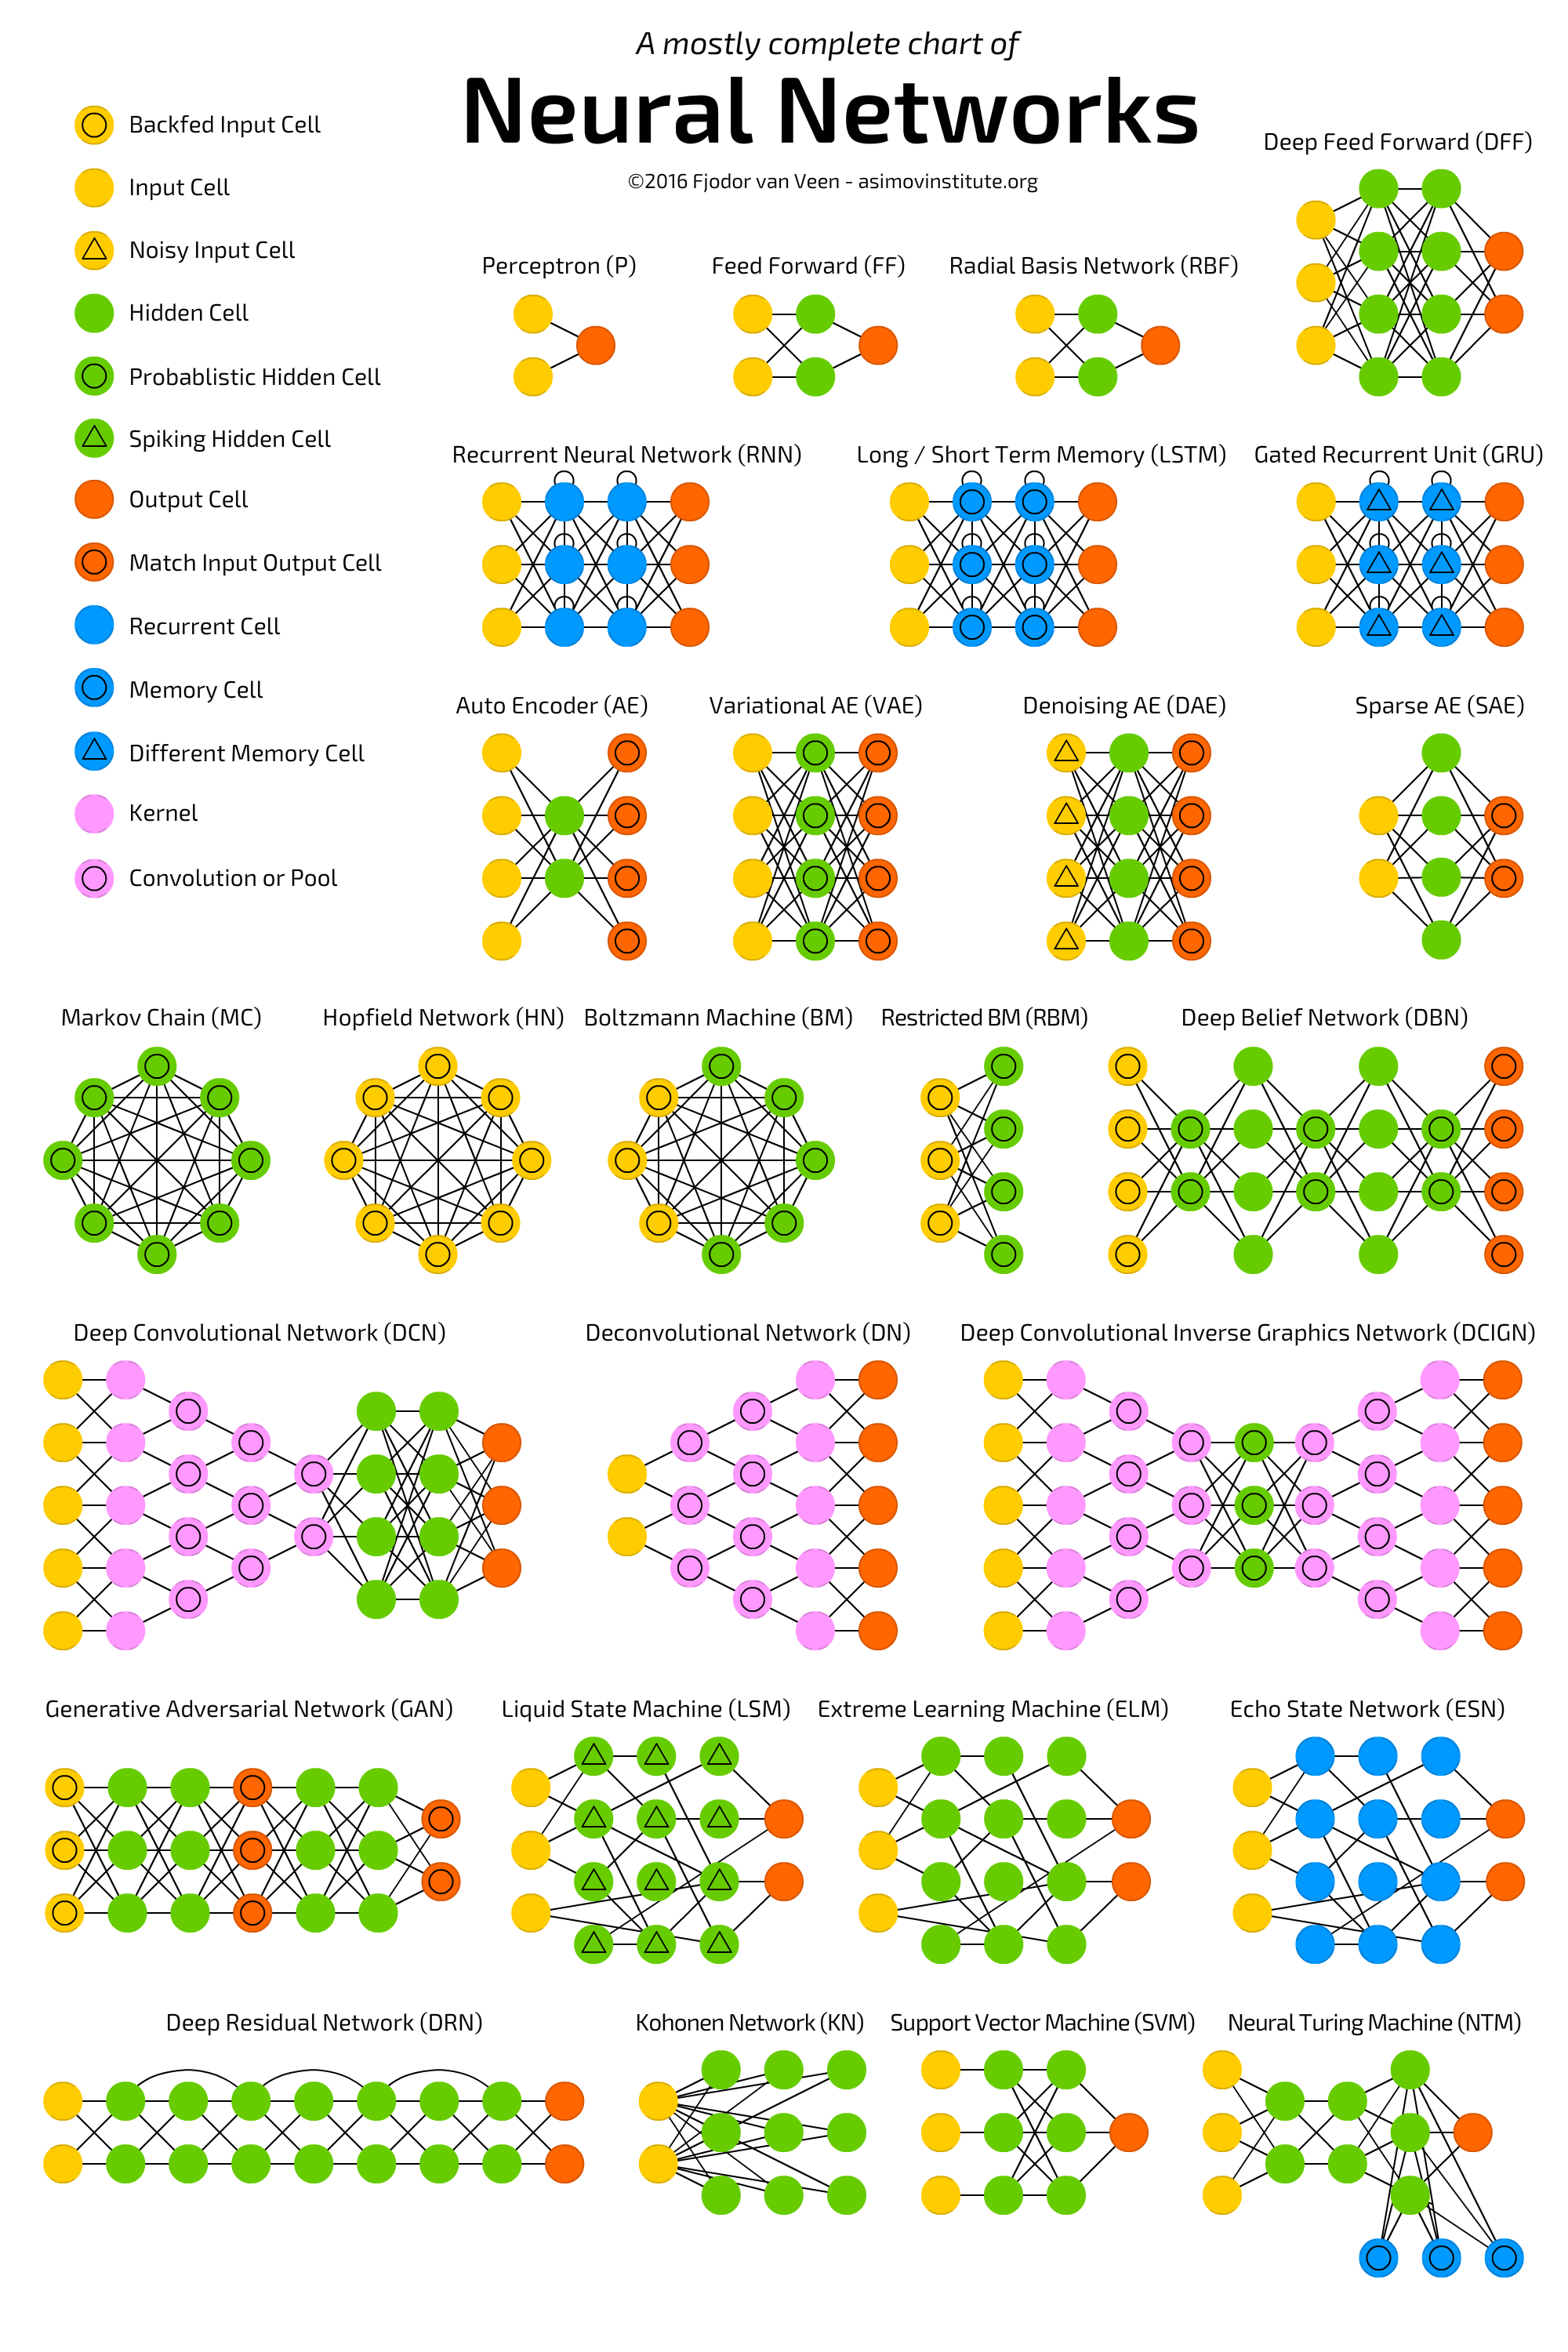 Python Cheat Sheets for Neural Networks & Machine Learning from 2016